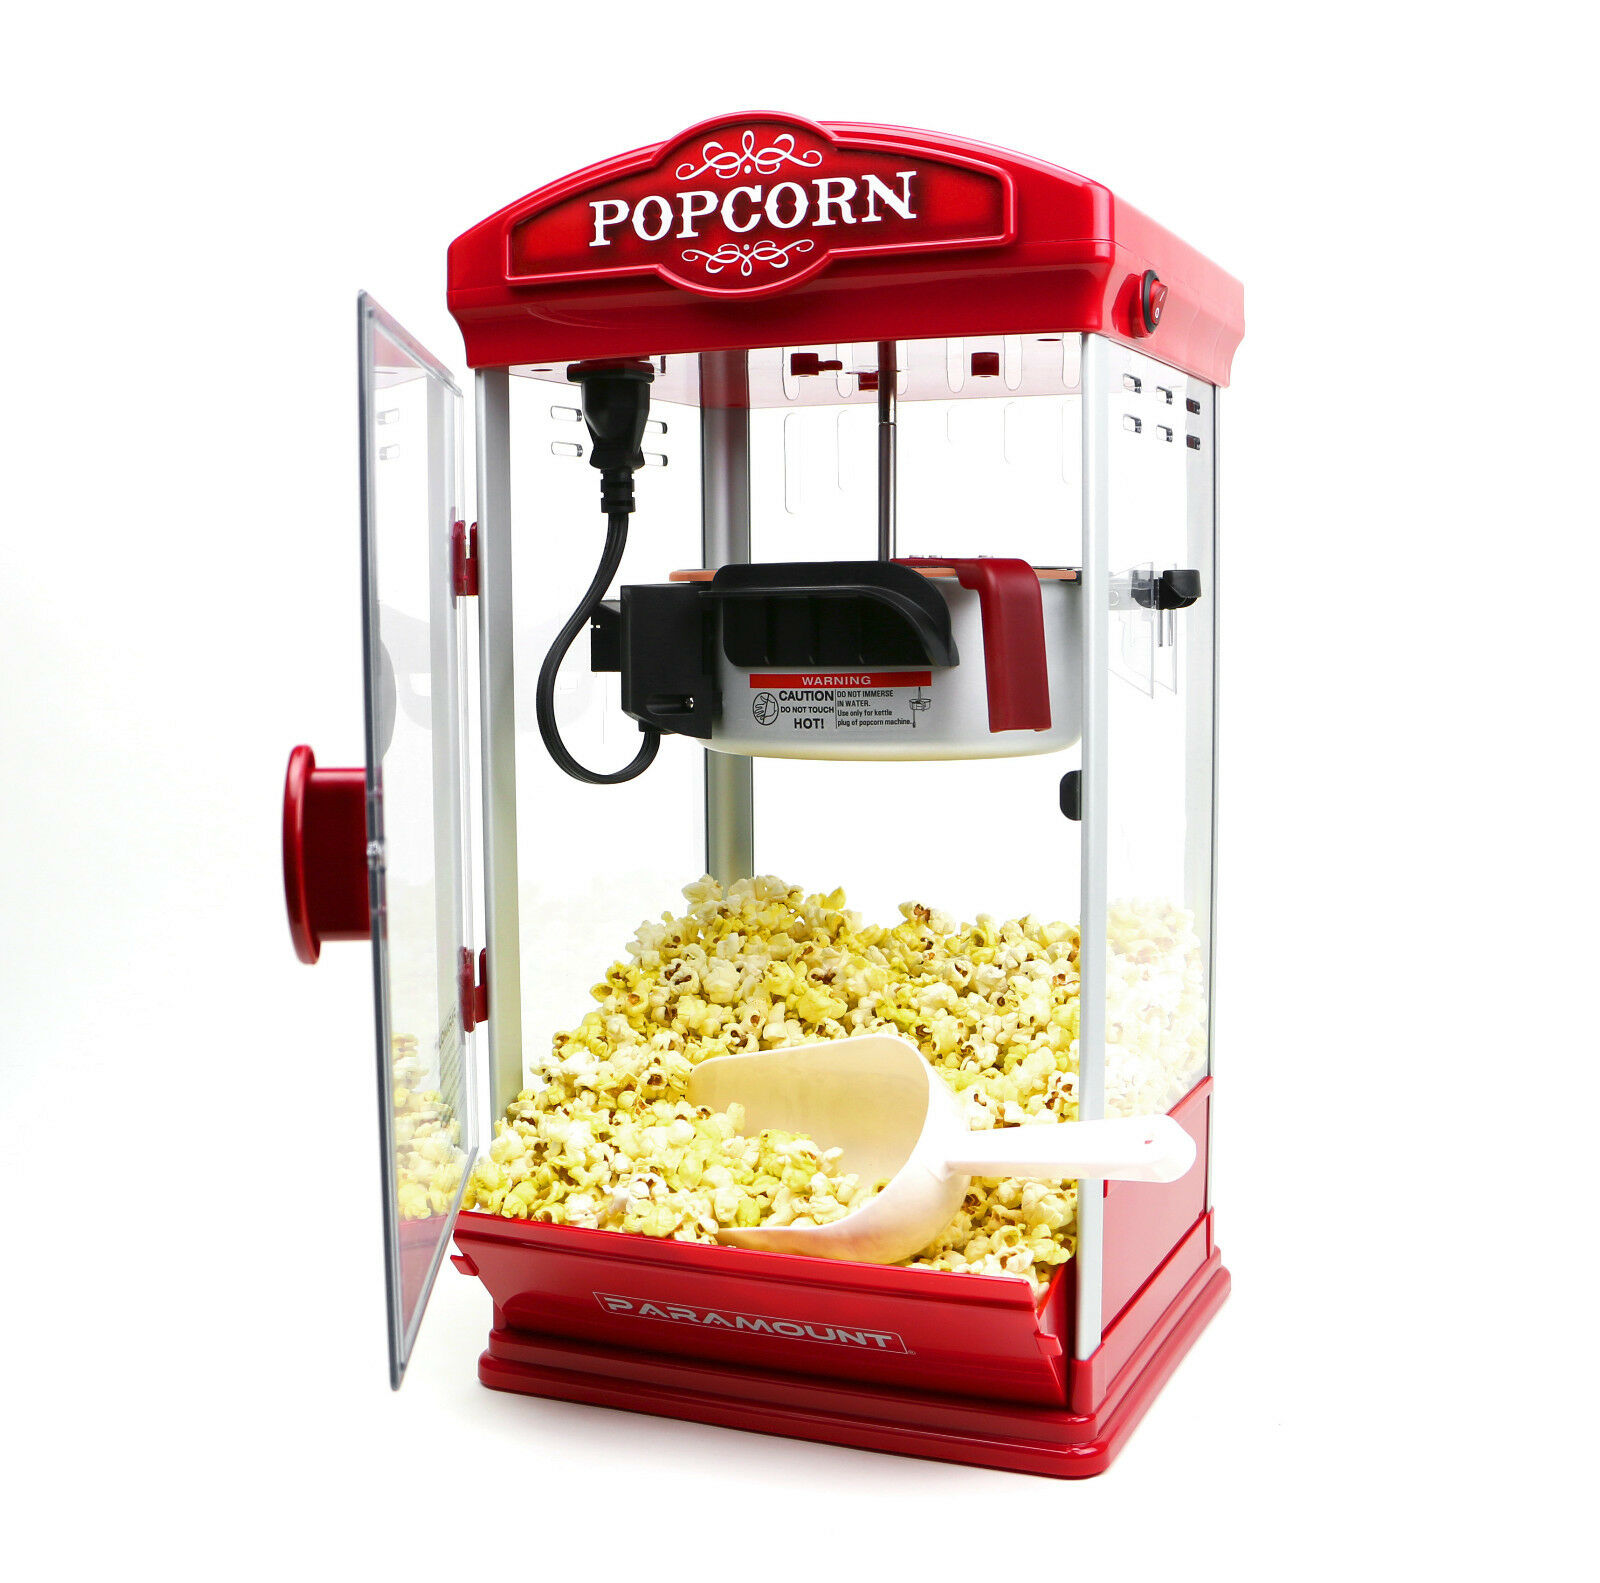 8oz Red Popcorn Maker Machine By Paramount - New 8 Oz Capacity Theater Popper